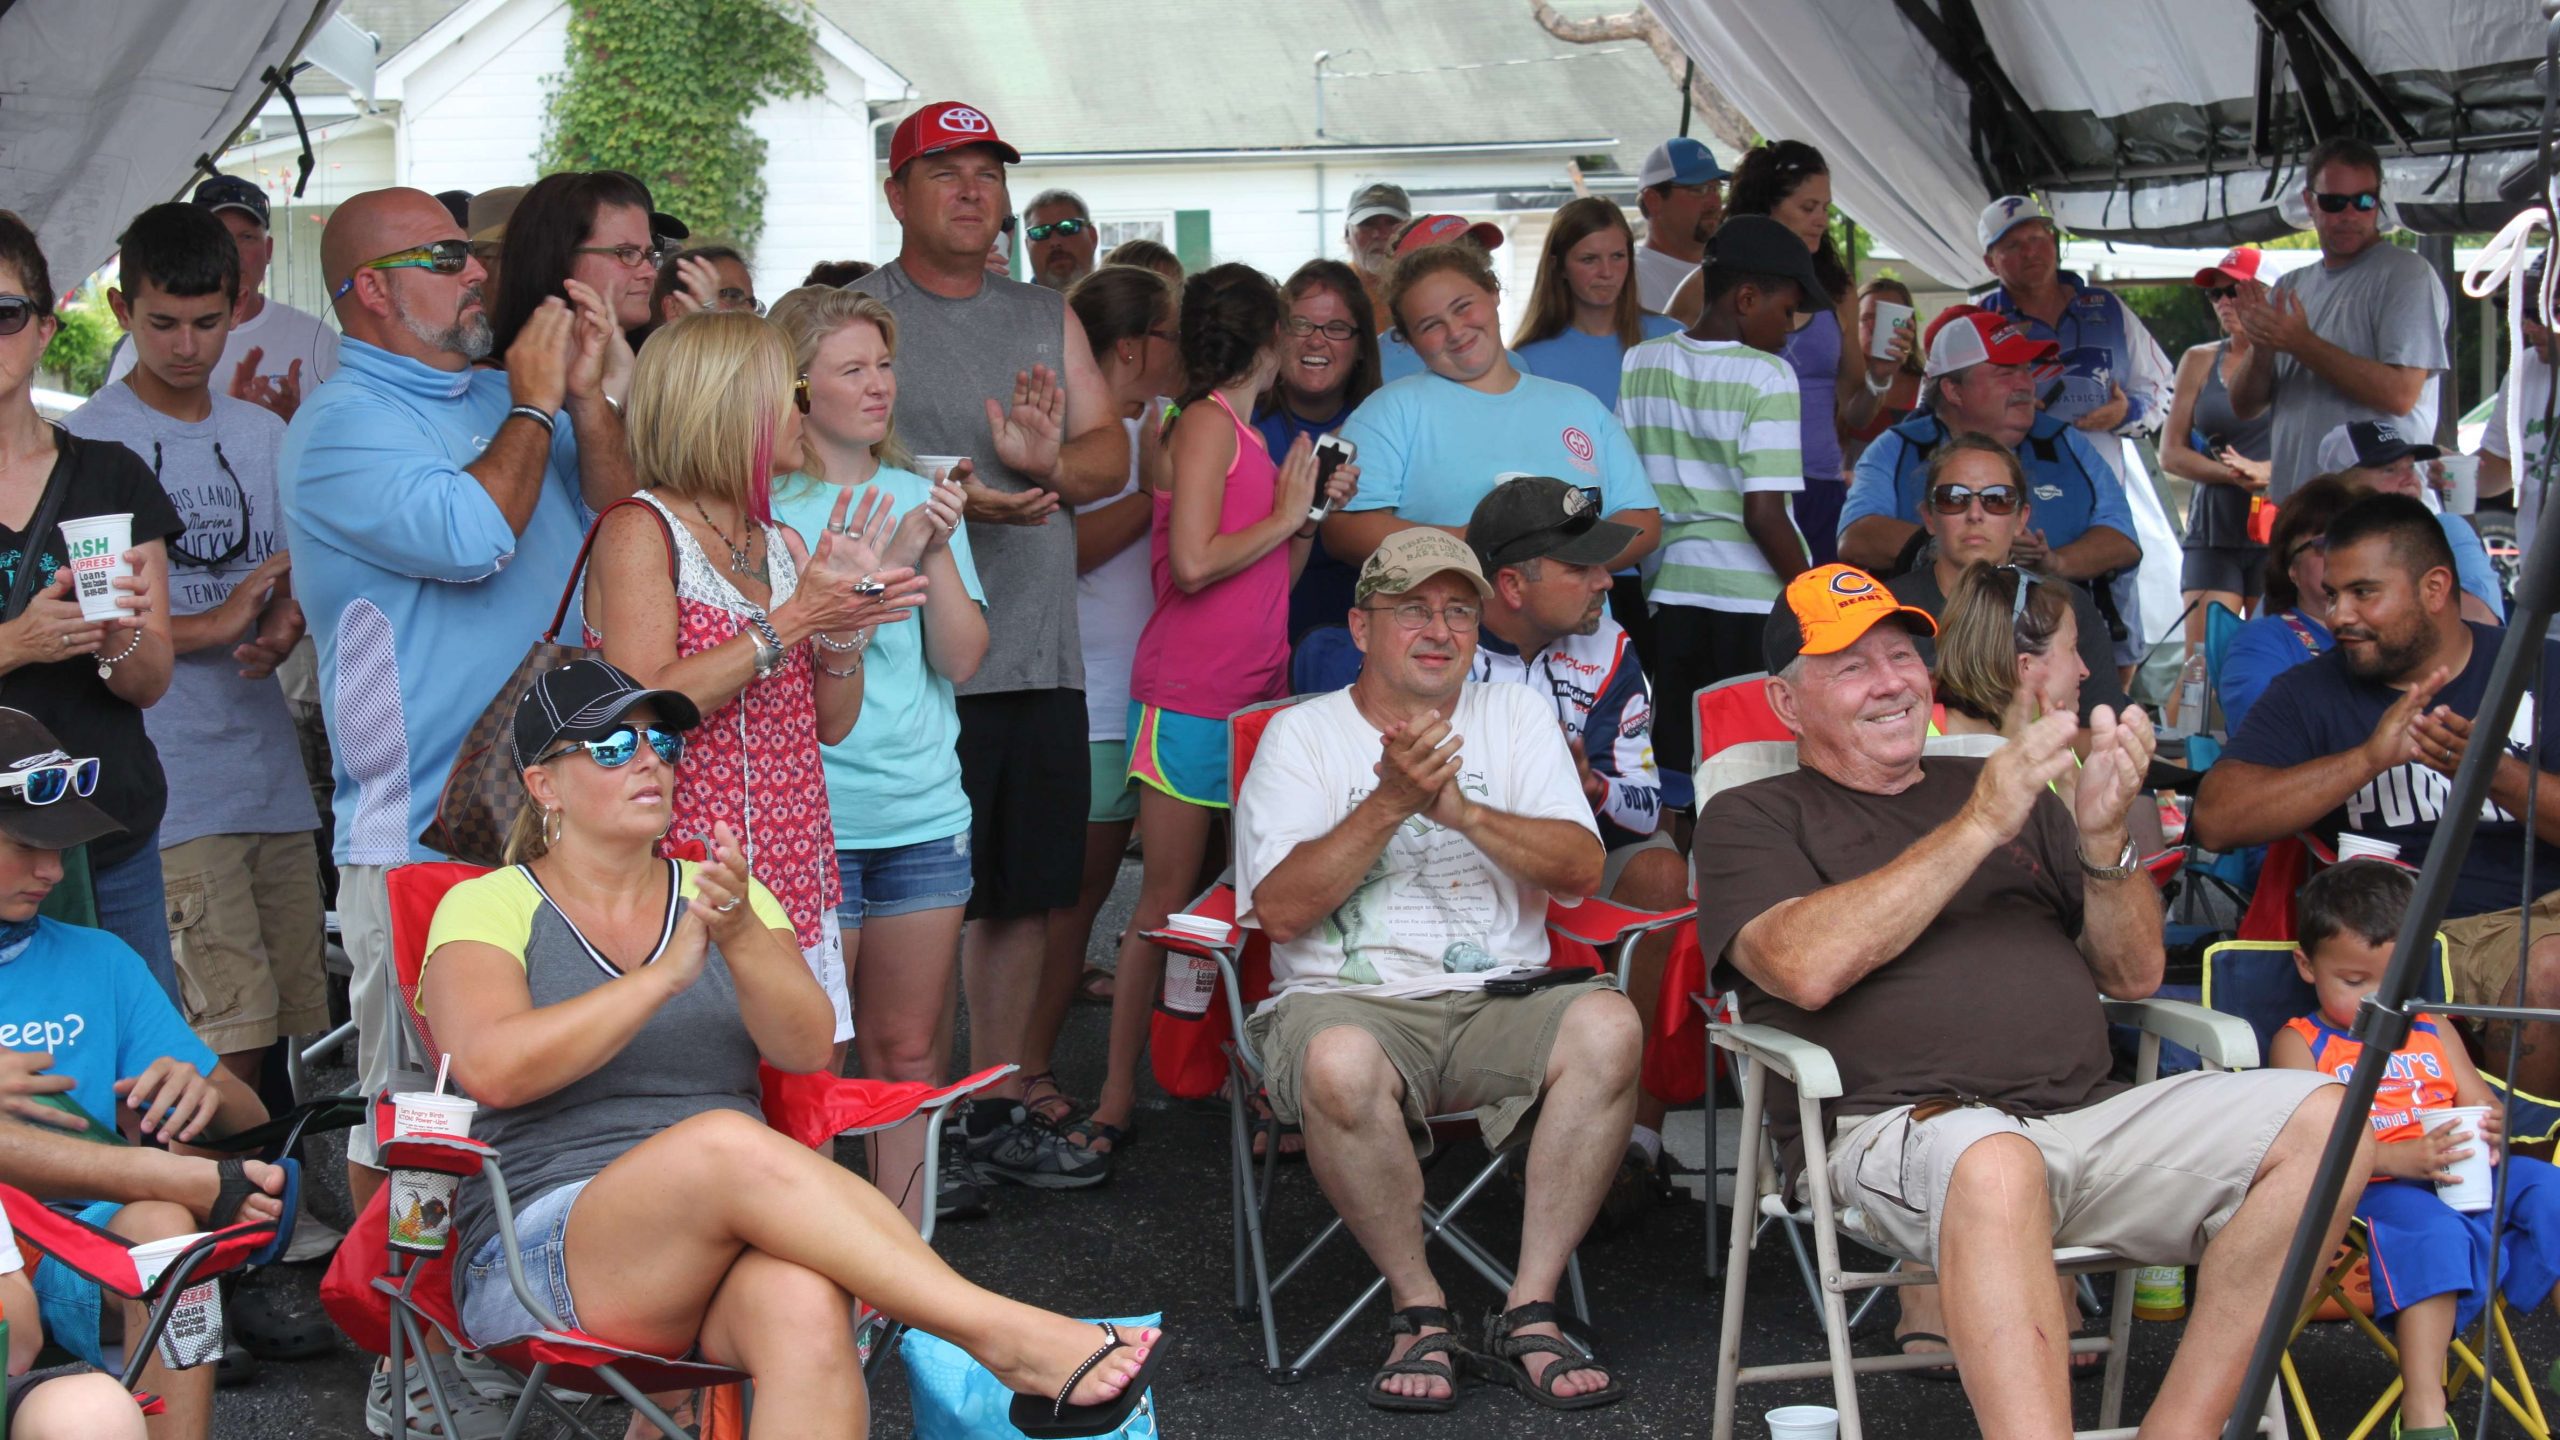 Fans applaud the young anglers as weigh-in is about to begin.